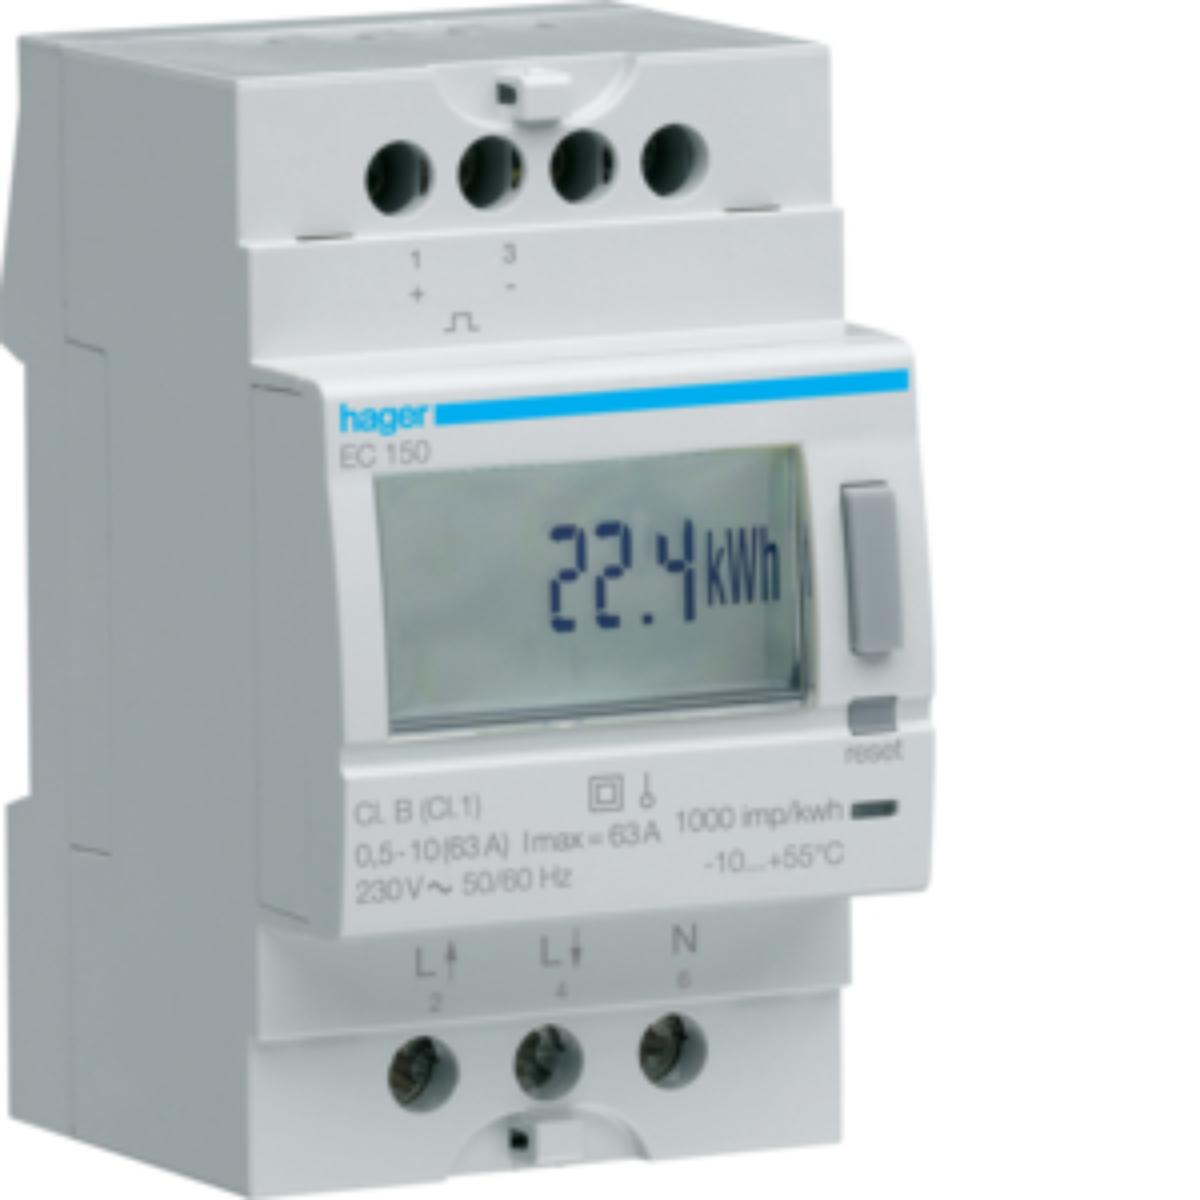 METER KWH 1PH DIR CONNECT PULSED OUTPUT